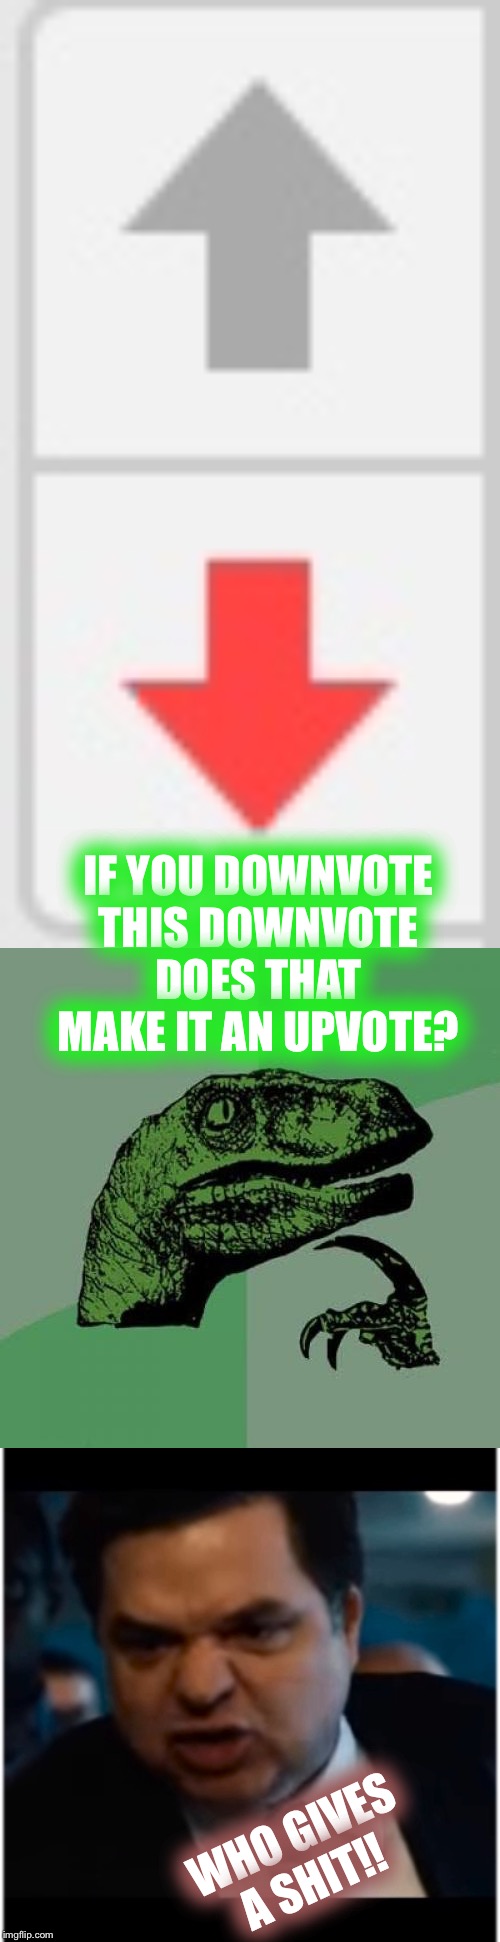 IF YOU DOWNVOTE THIS DOWNVOTE DOES THAT MAKE IT AN UPVOTE? WHO GIVES A SHIT!! | image tagged in memes,philosoraptor,you stupid shit,downs for jack | made w/ Imgflip meme maker